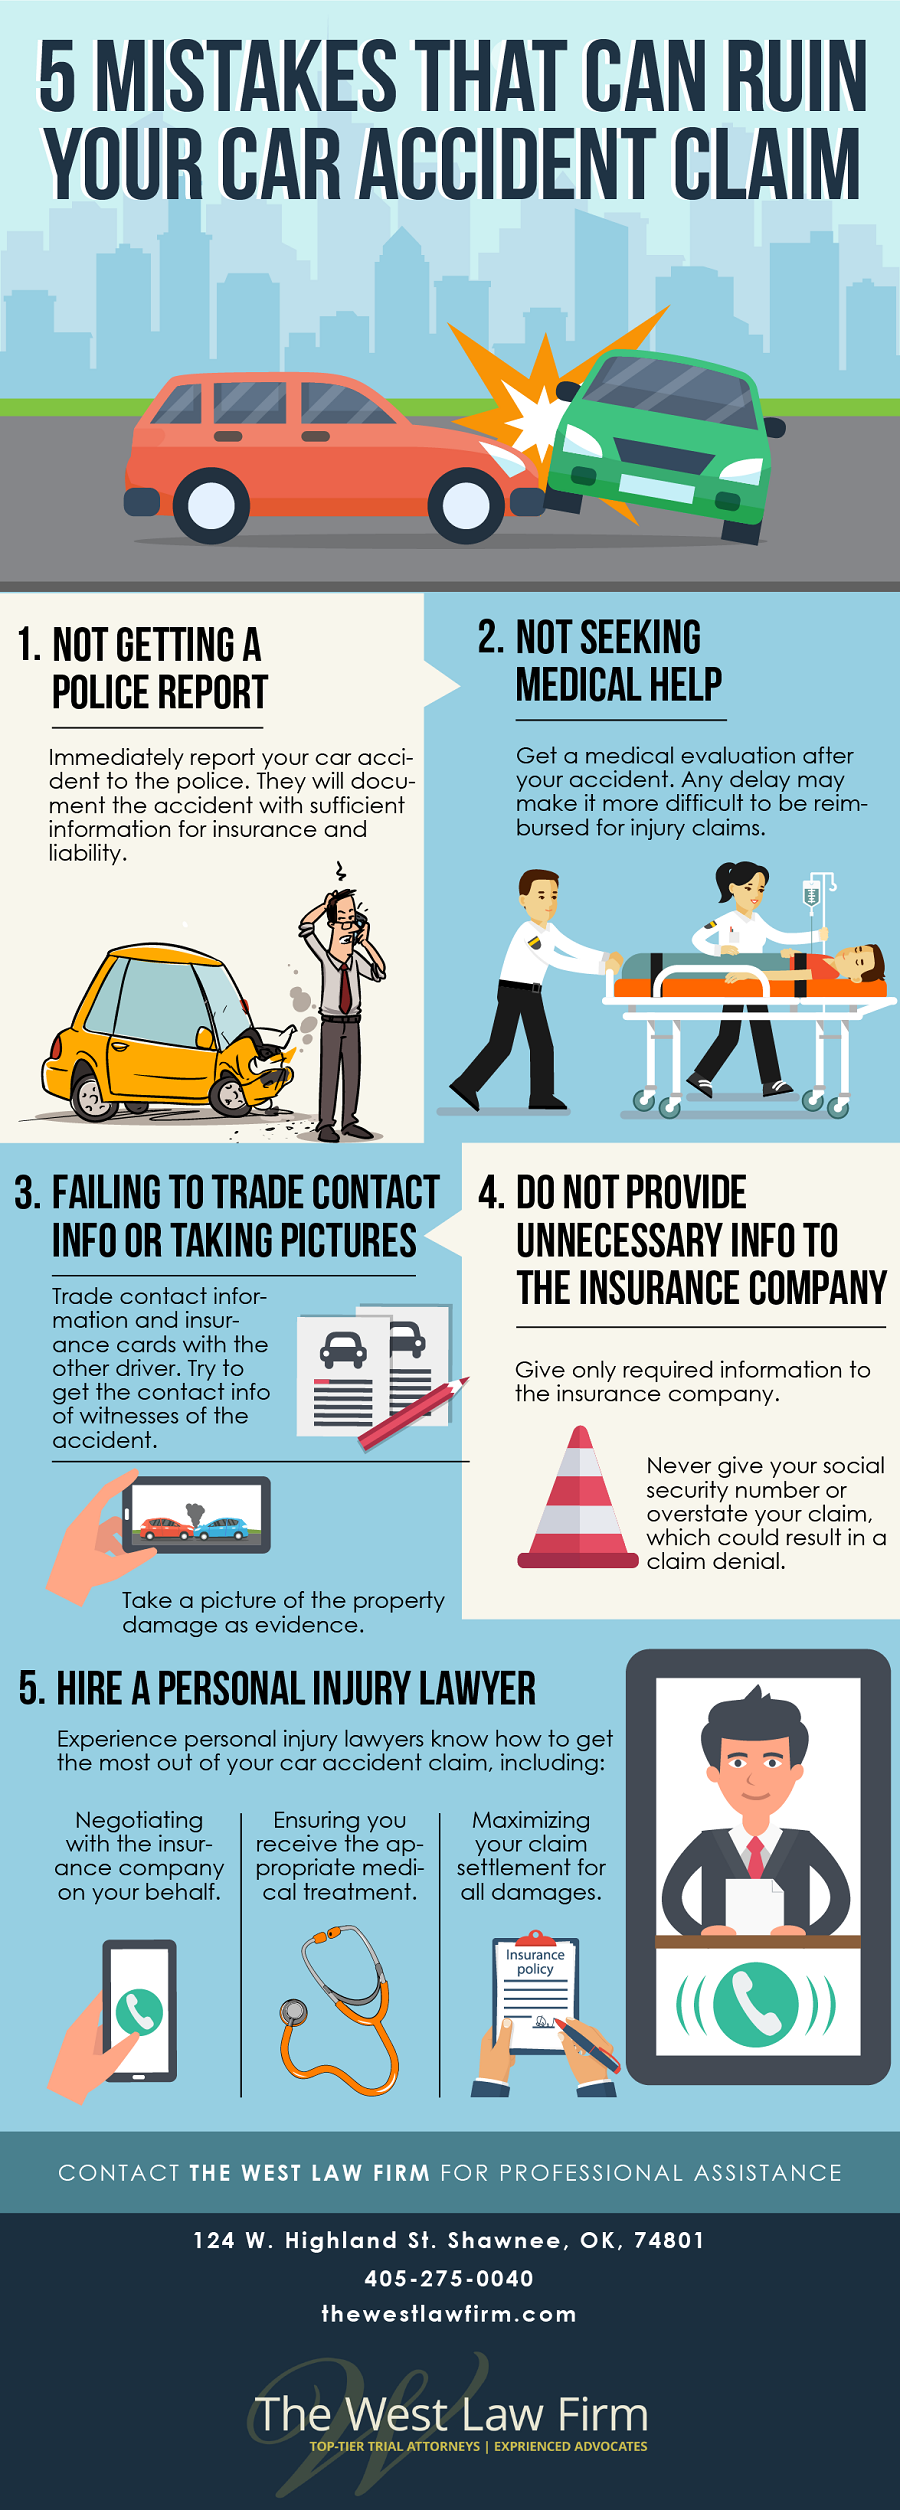 5 mistakes that can ruin your car accident claim